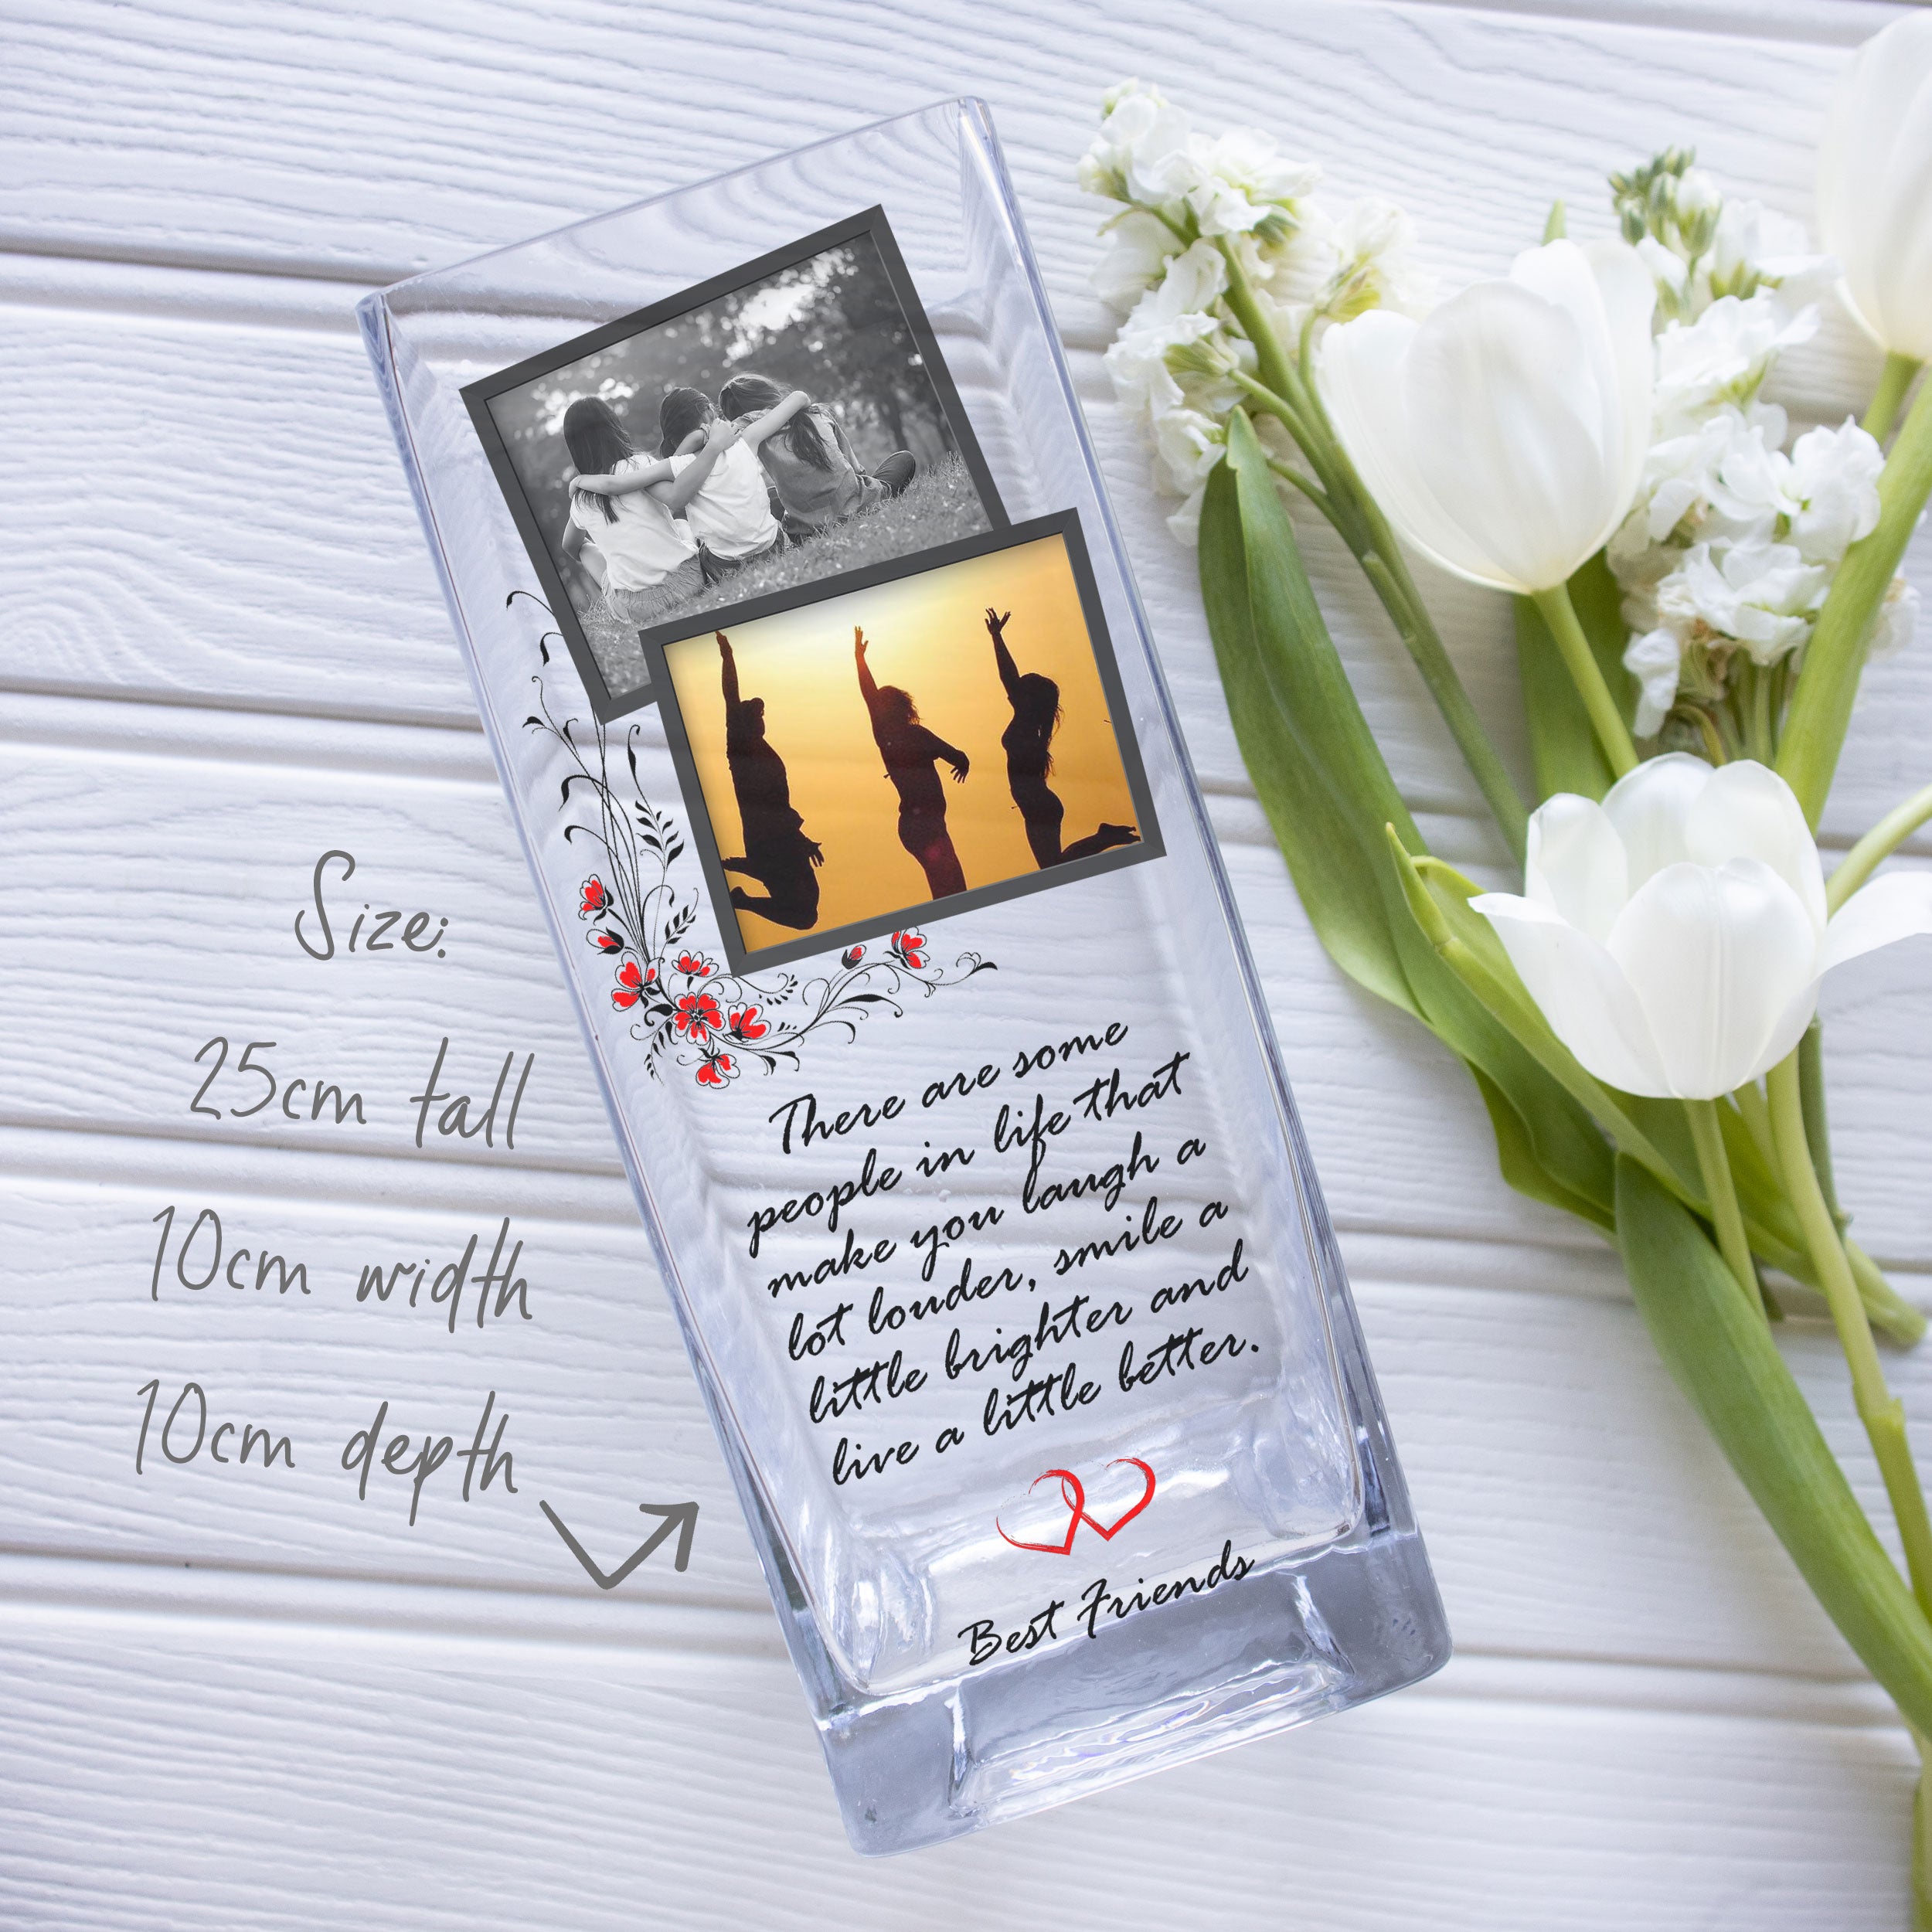 Best Friend Custom Photo Glass Vase | Acrylic Picture Flower Stand Pal Quotation Gift Ideas | Personalized Friendly Home Decor Present